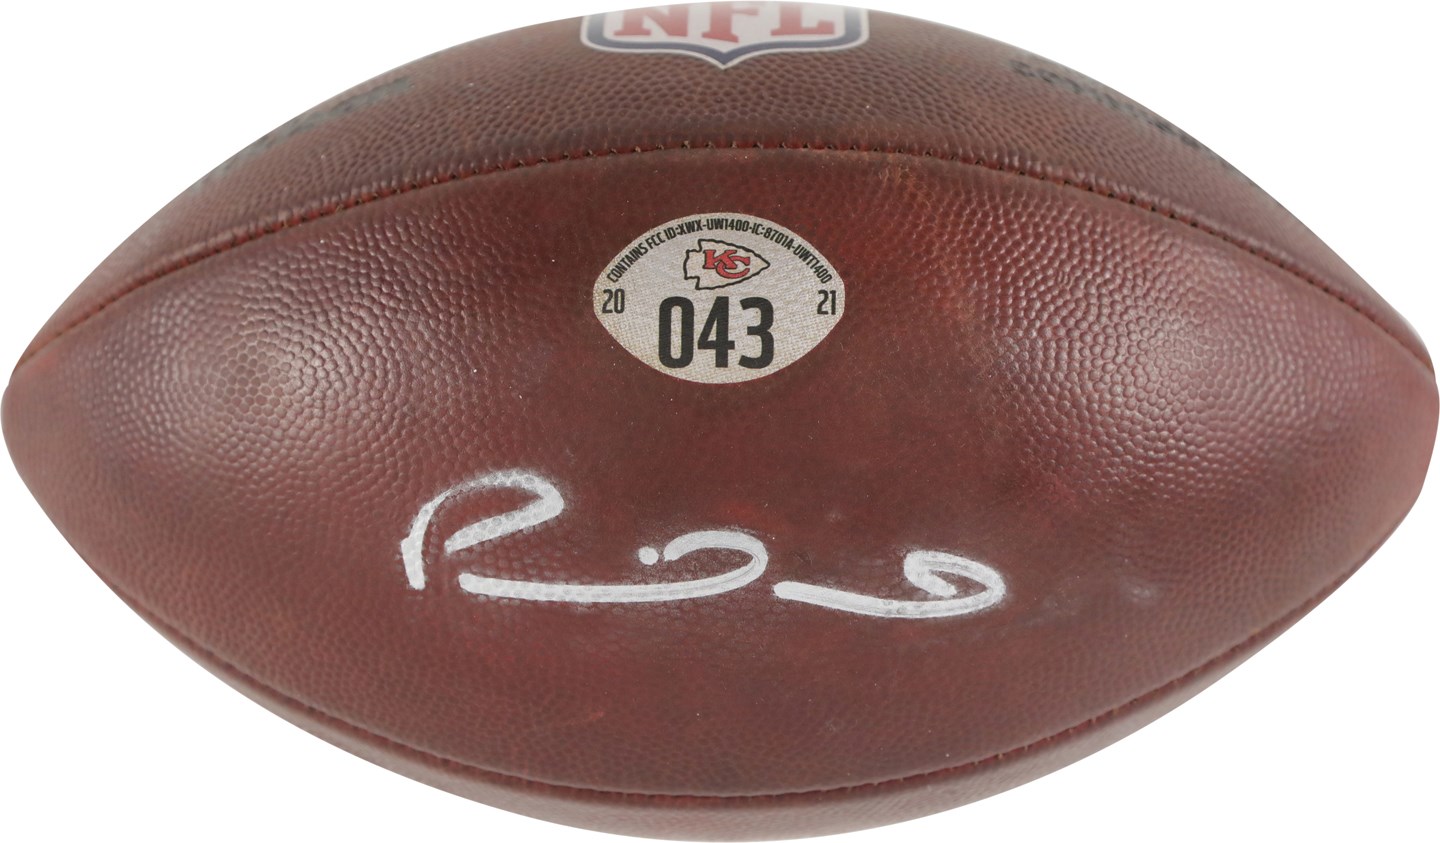 /12/21 Patrick Mahomes Signed Game Used Rushing Touchdown Football for the First Kansas City Chiefs Touchdown of the Season! (Resolution Photomatching & Chiefs LOA)